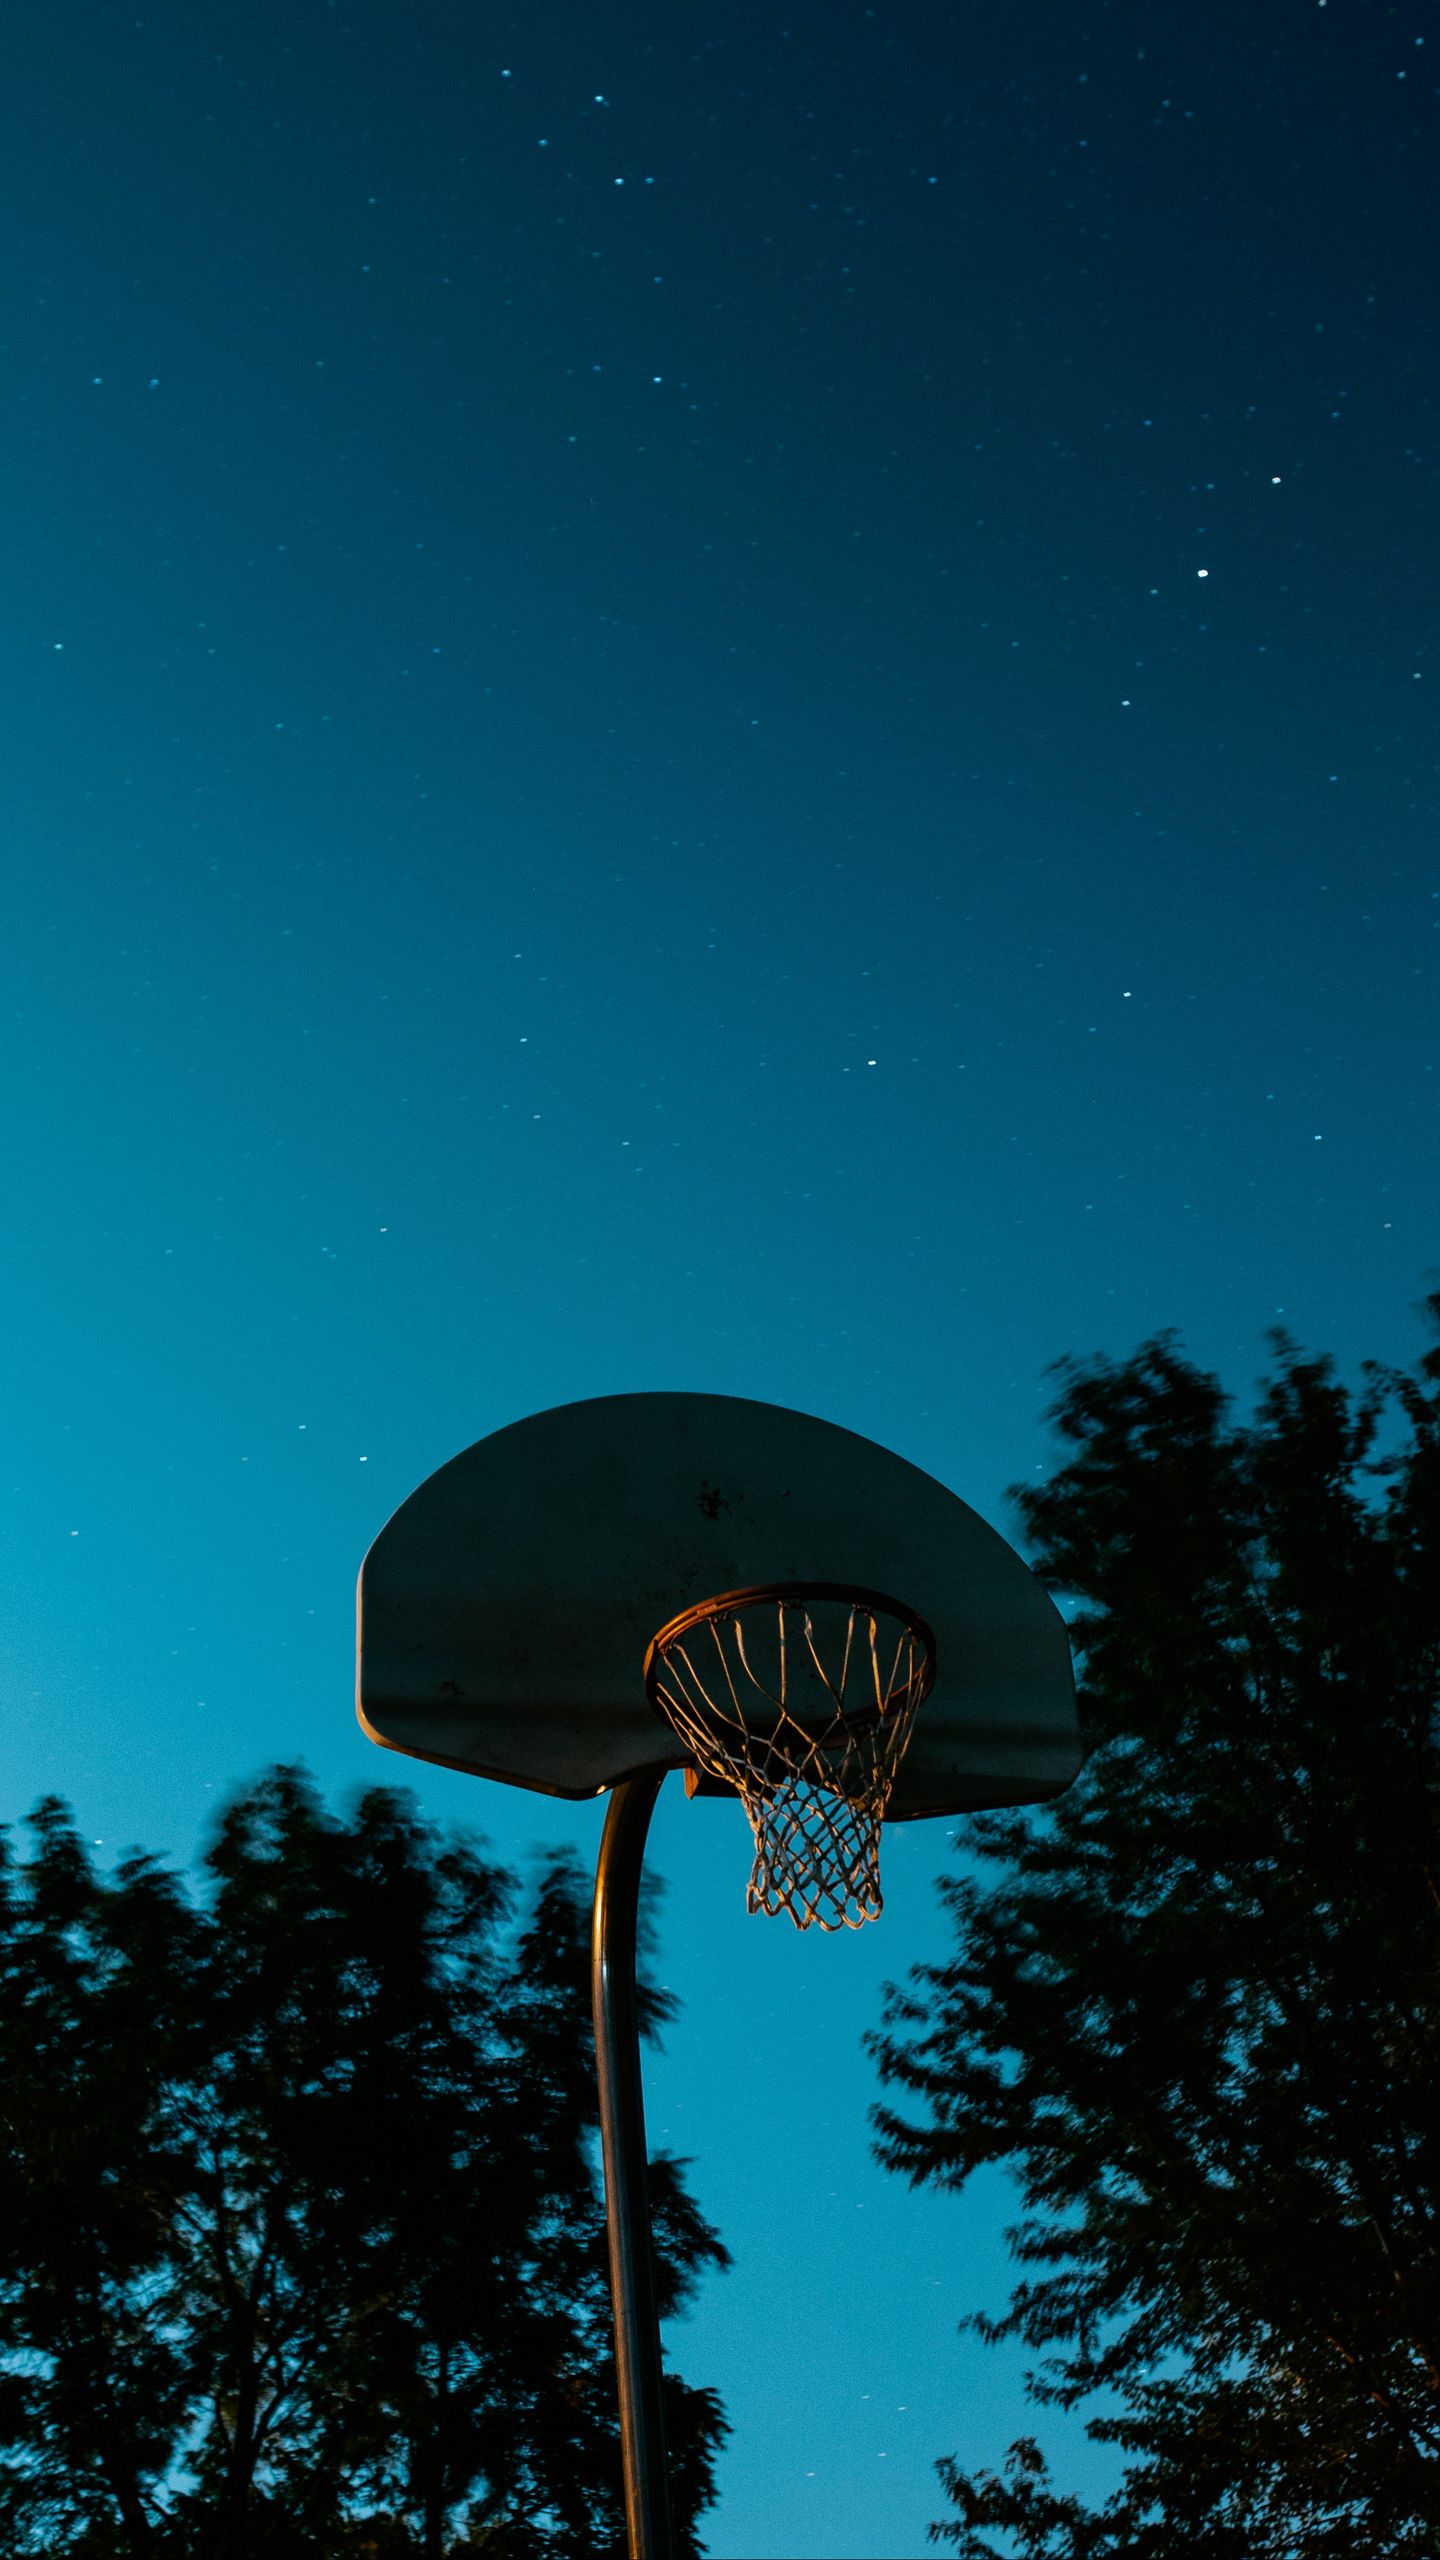 500 Basketball Hoop Pictures HD  Download Free Images on Unsplash